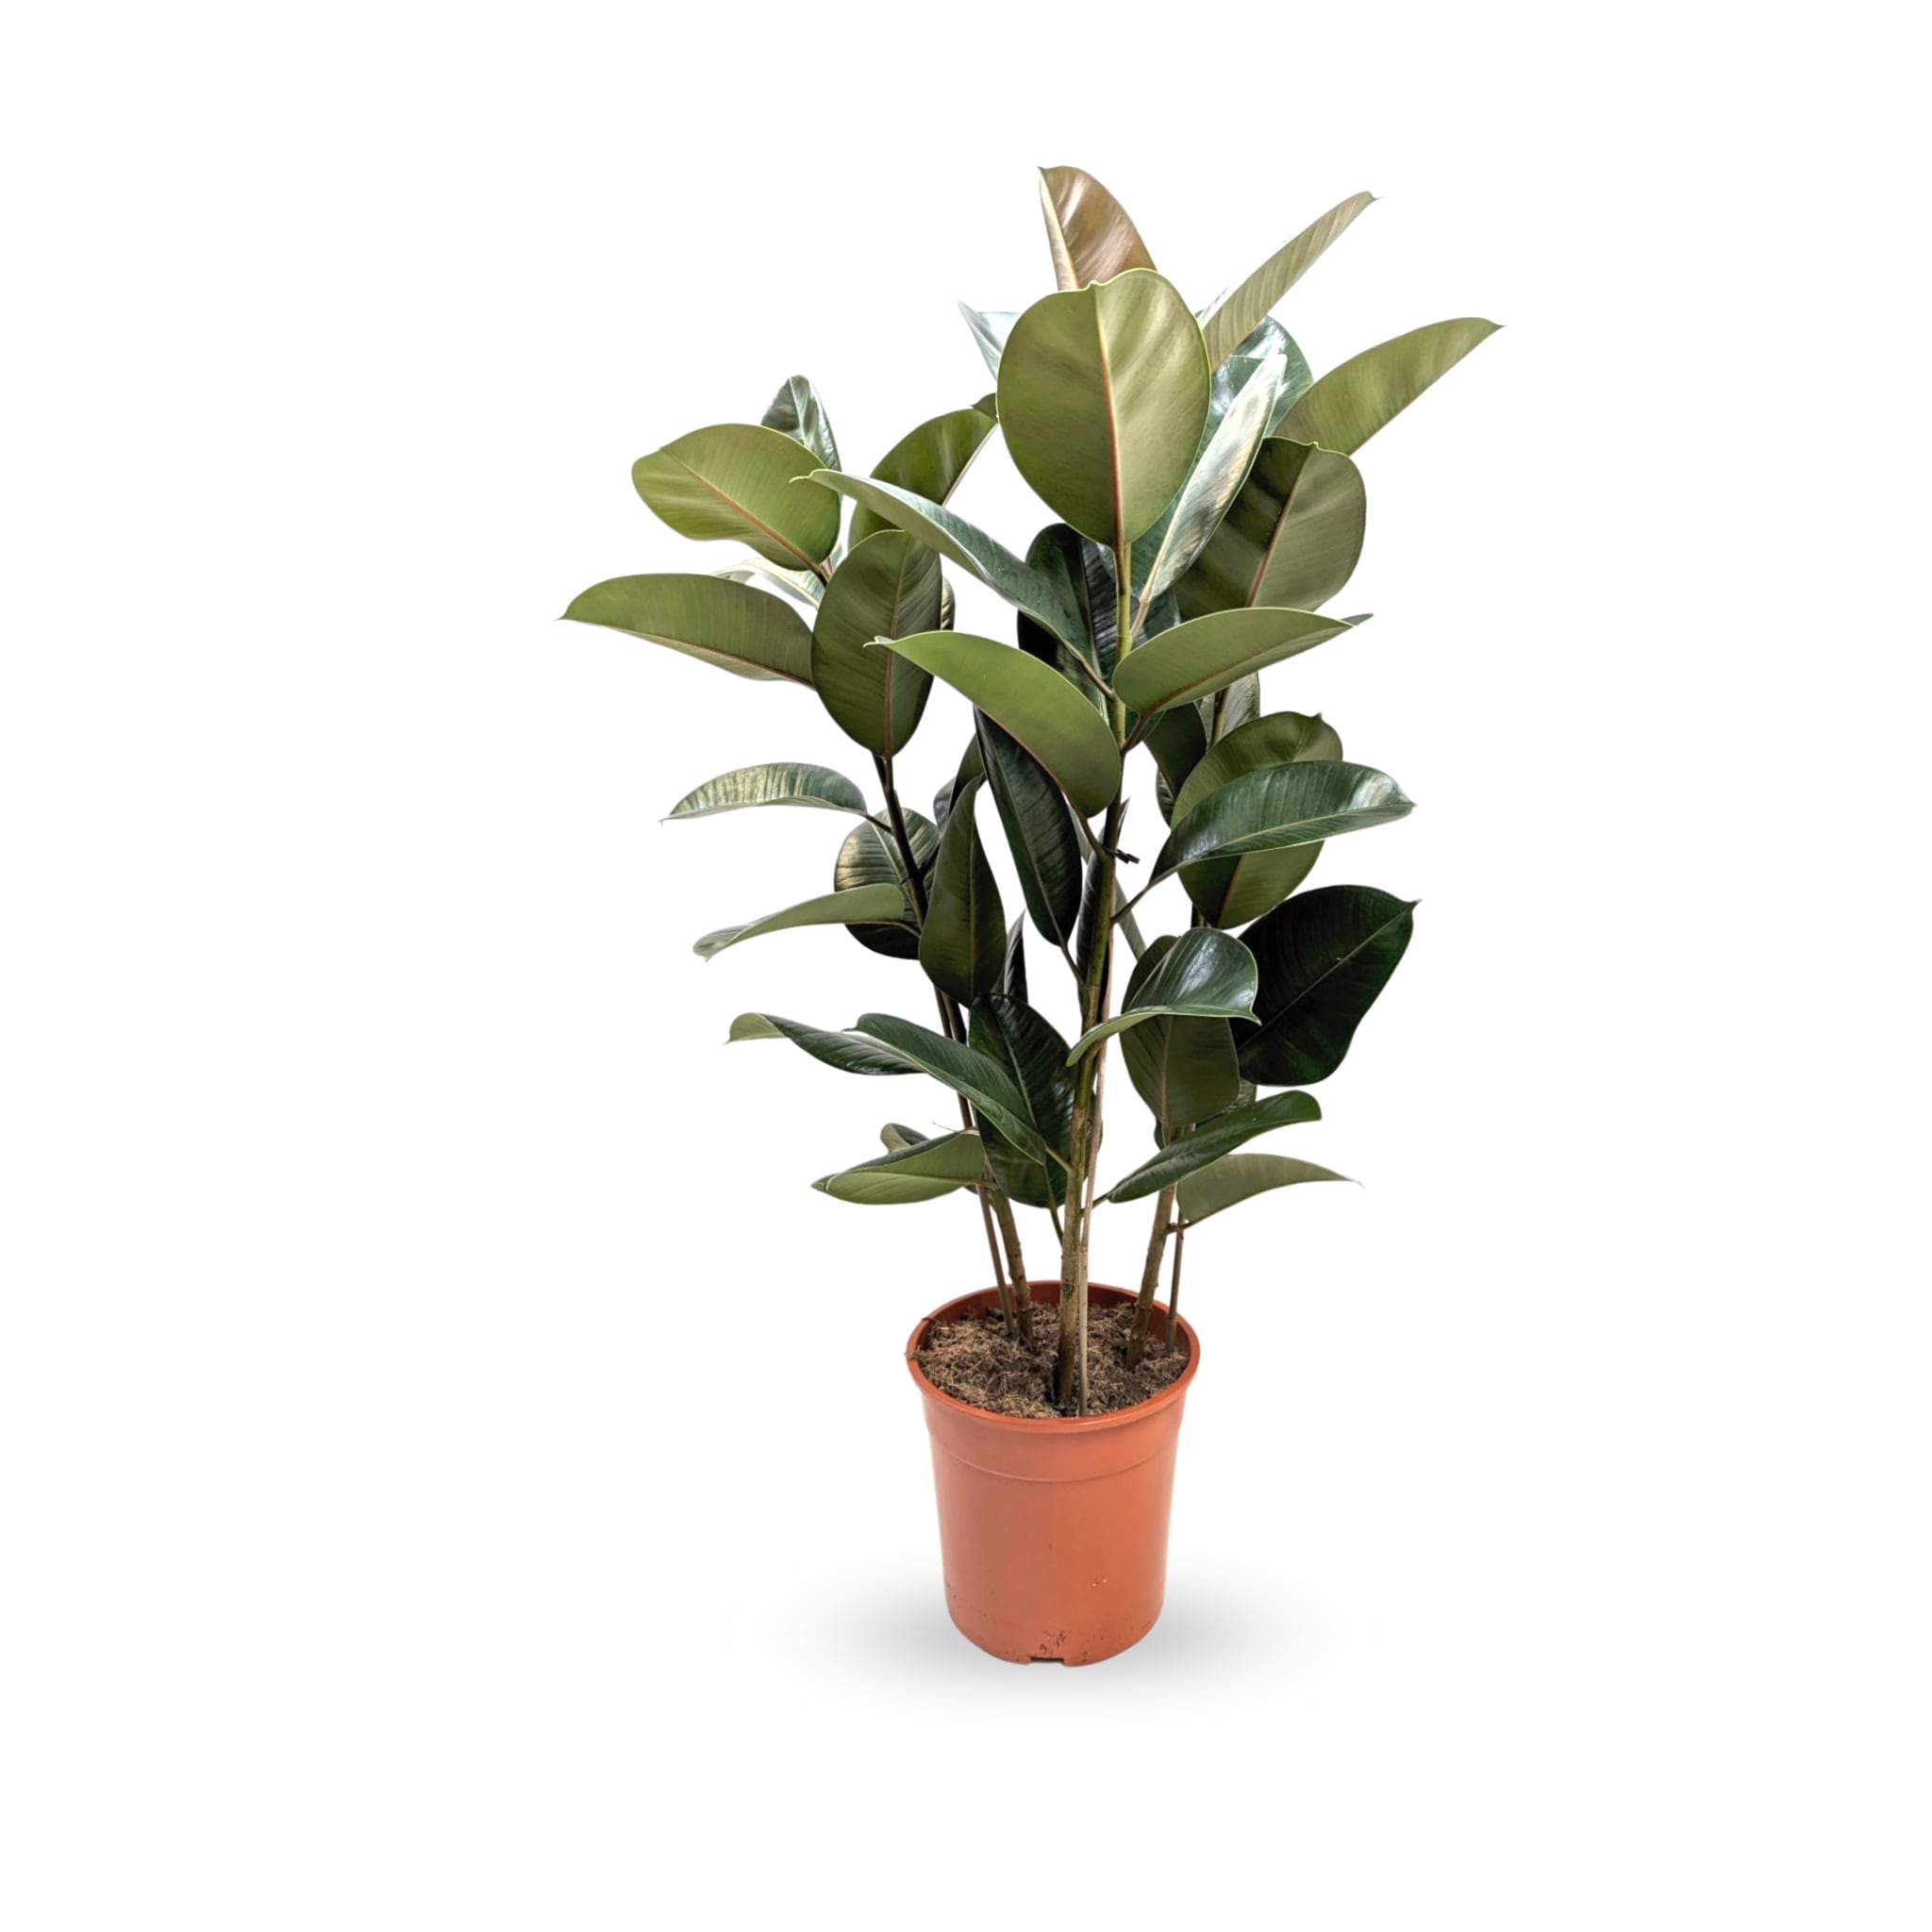 The benefits of the XL Ficus robusta houseplant